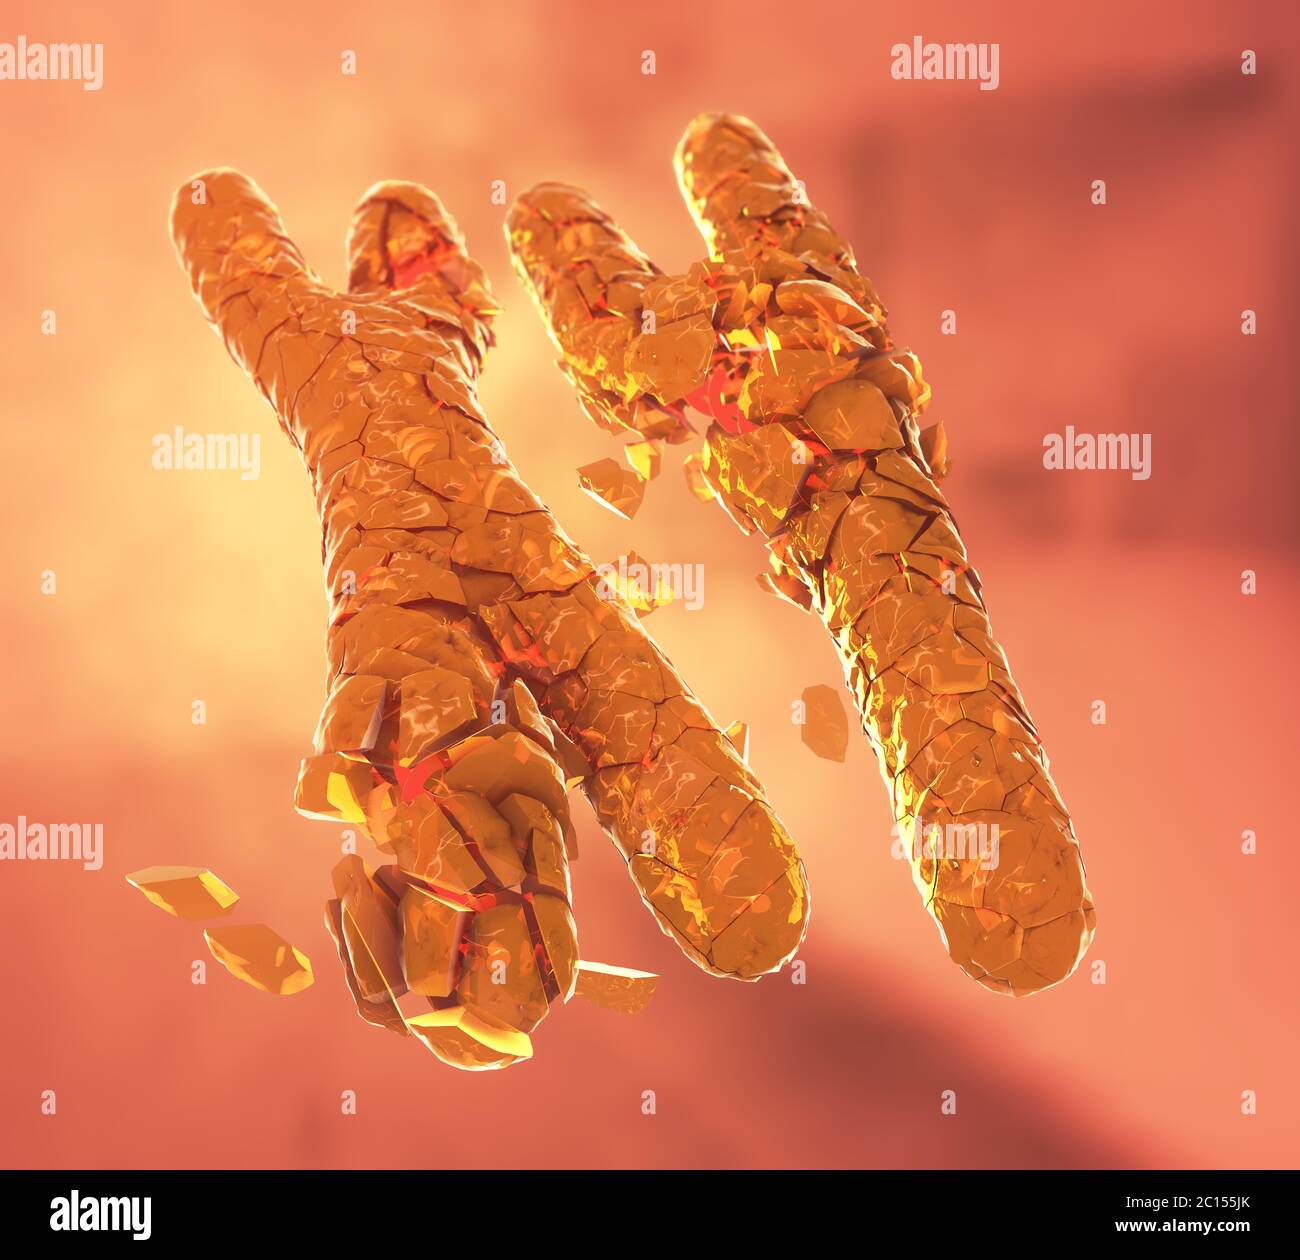 3D Illustration of broken or defected orange colored x and y chromosomes Stock Photo